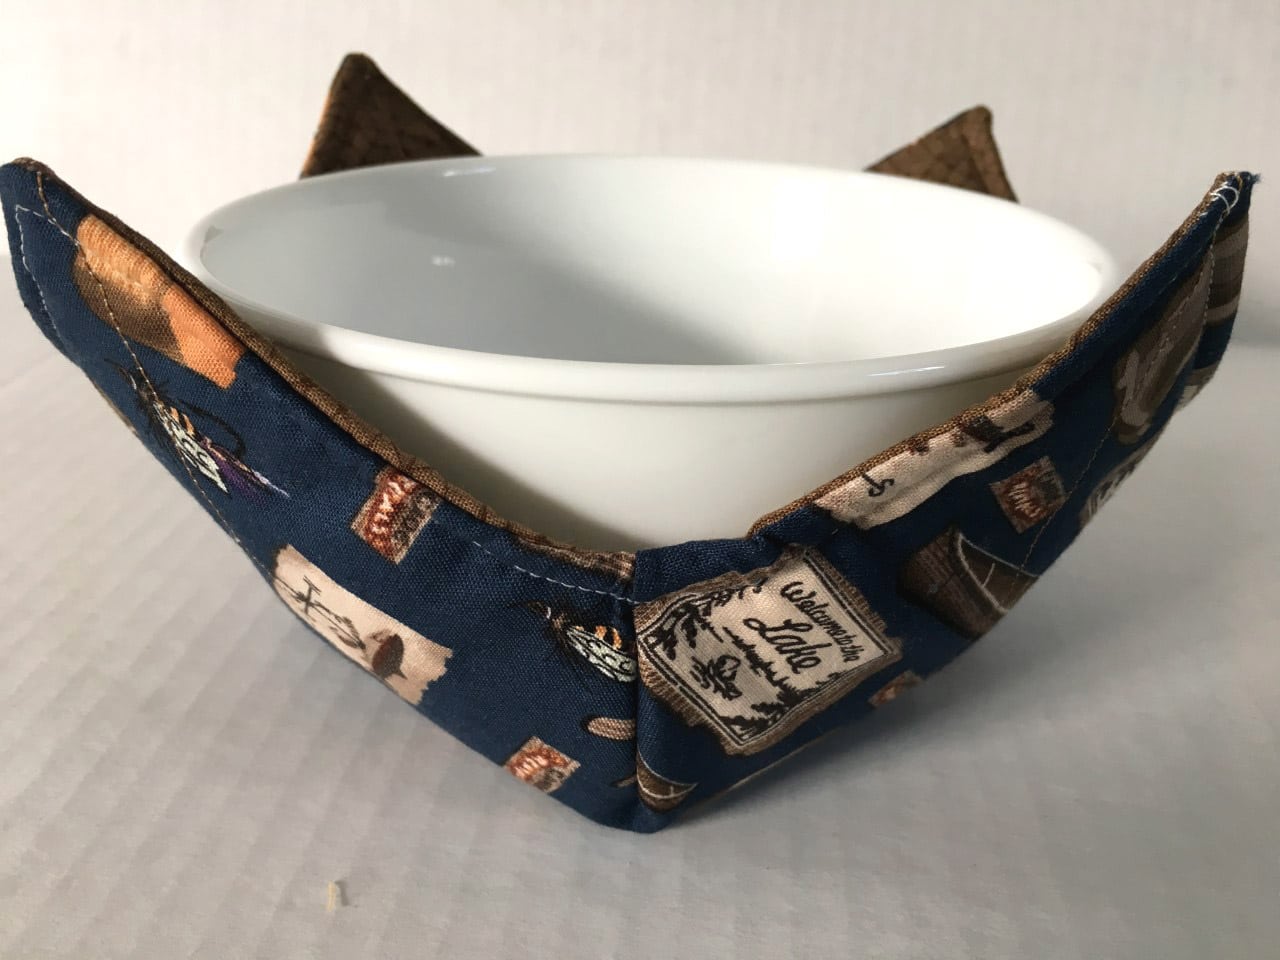 https://madeinmichigan.com/wp-content/uploads/2019/11/At-The-Lake-Microwave-Bowl-Holder-Cozy.jpg